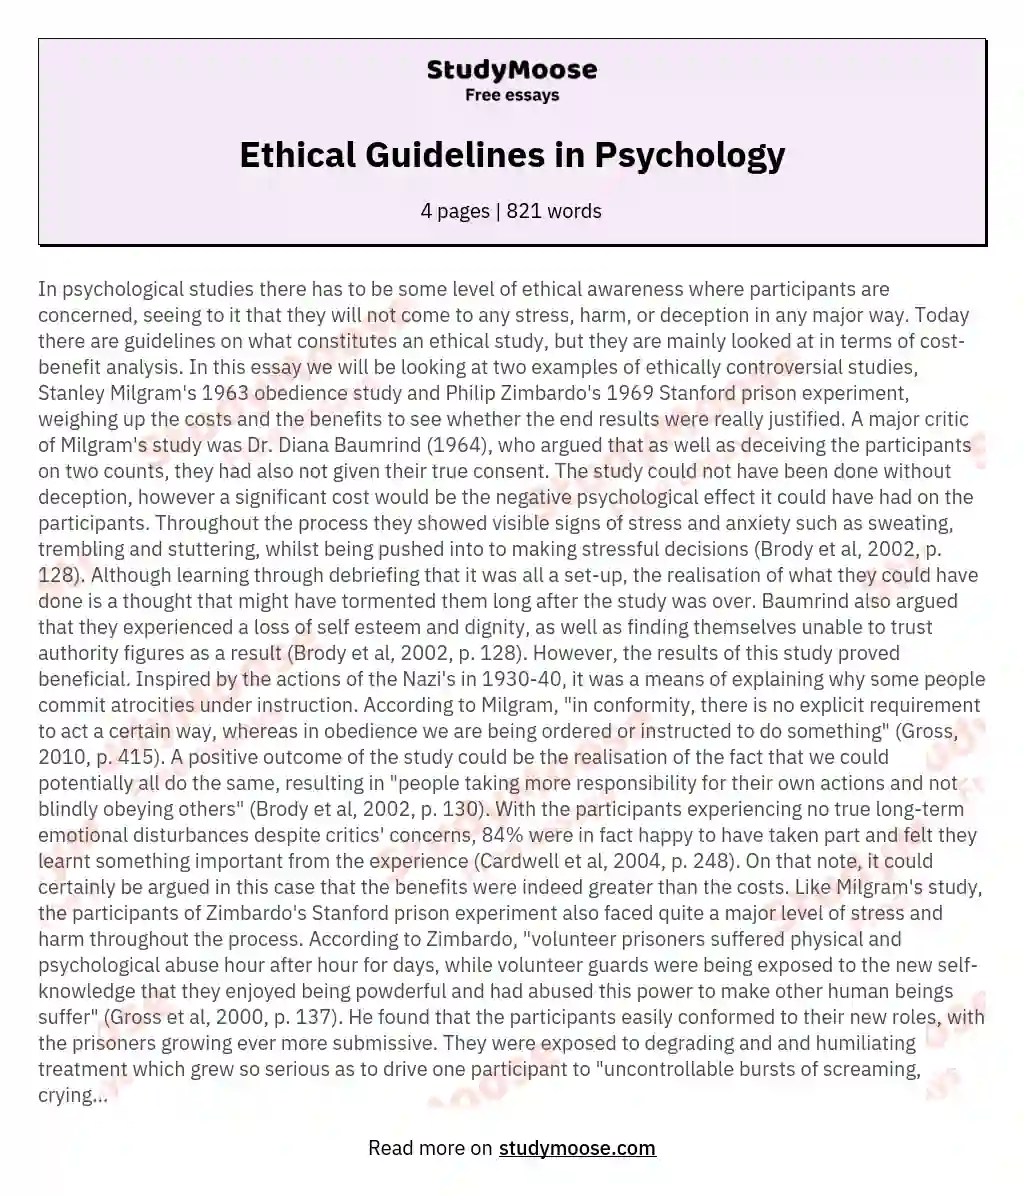 Ethical Guidelines in Psychology essay